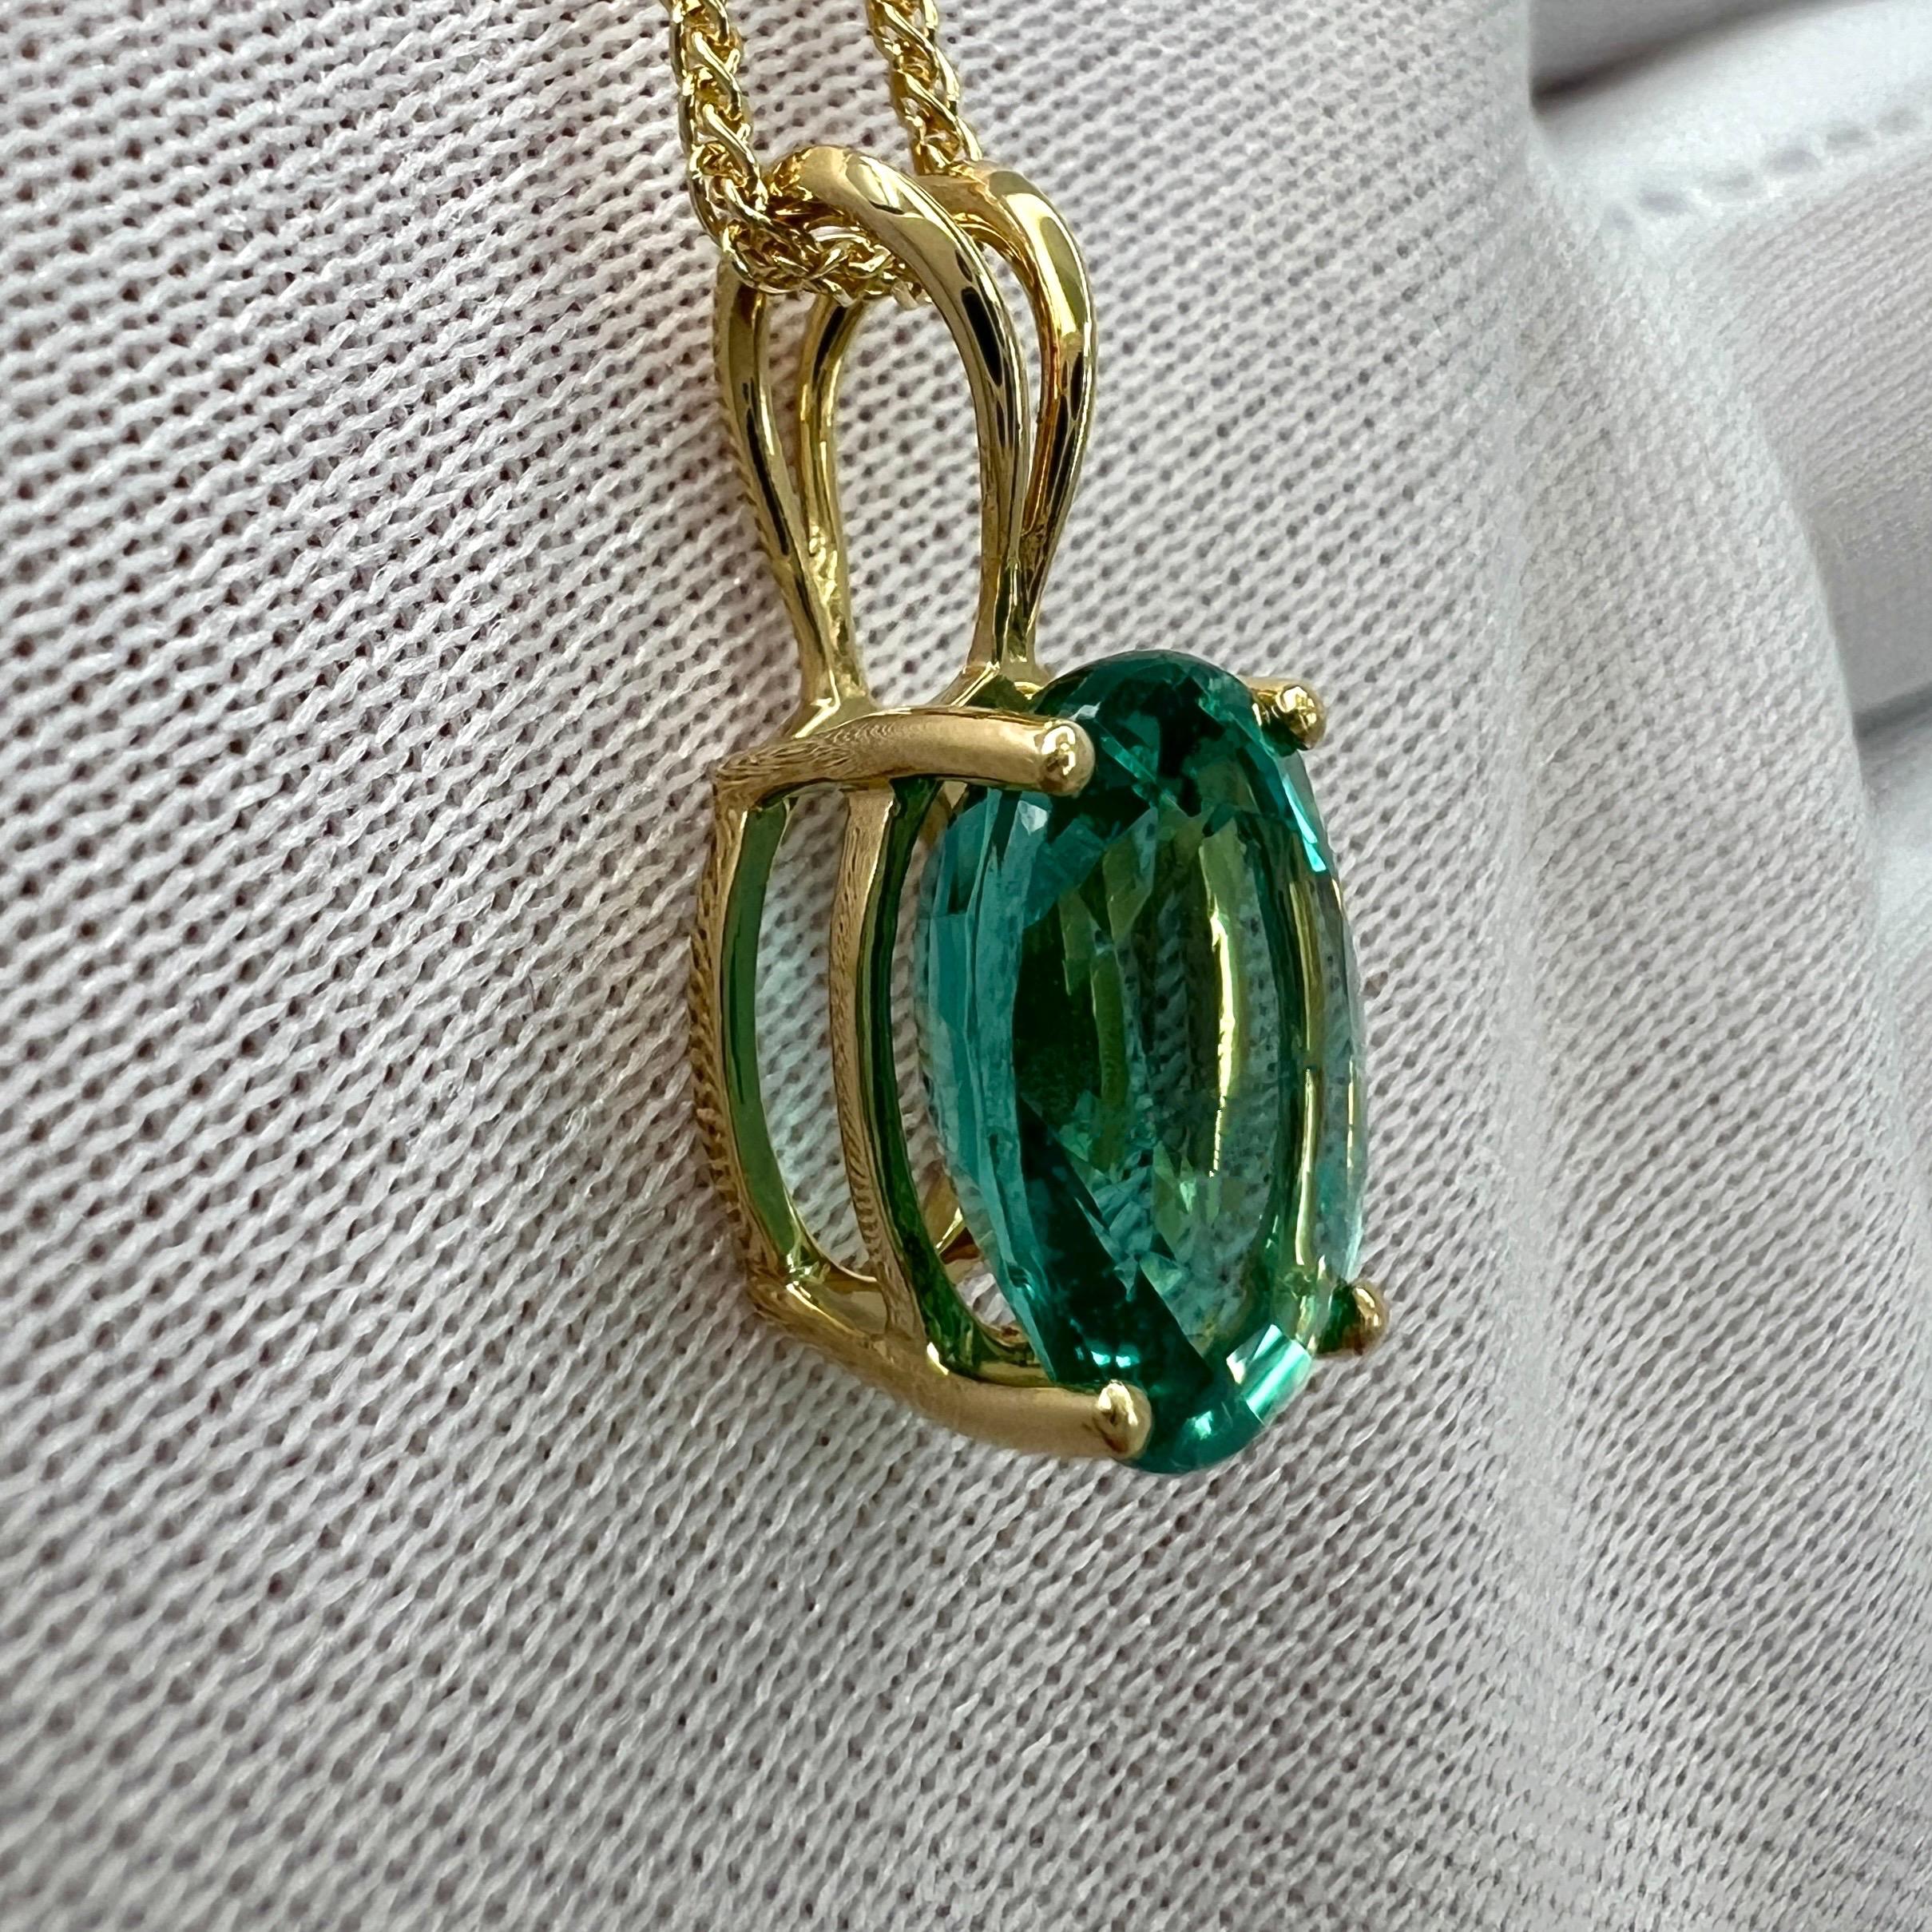 GIA Certified 2.95ct Vivid Blue Green Oval Cut Emerald 18k Gold Pendant Necklace For Sale 3